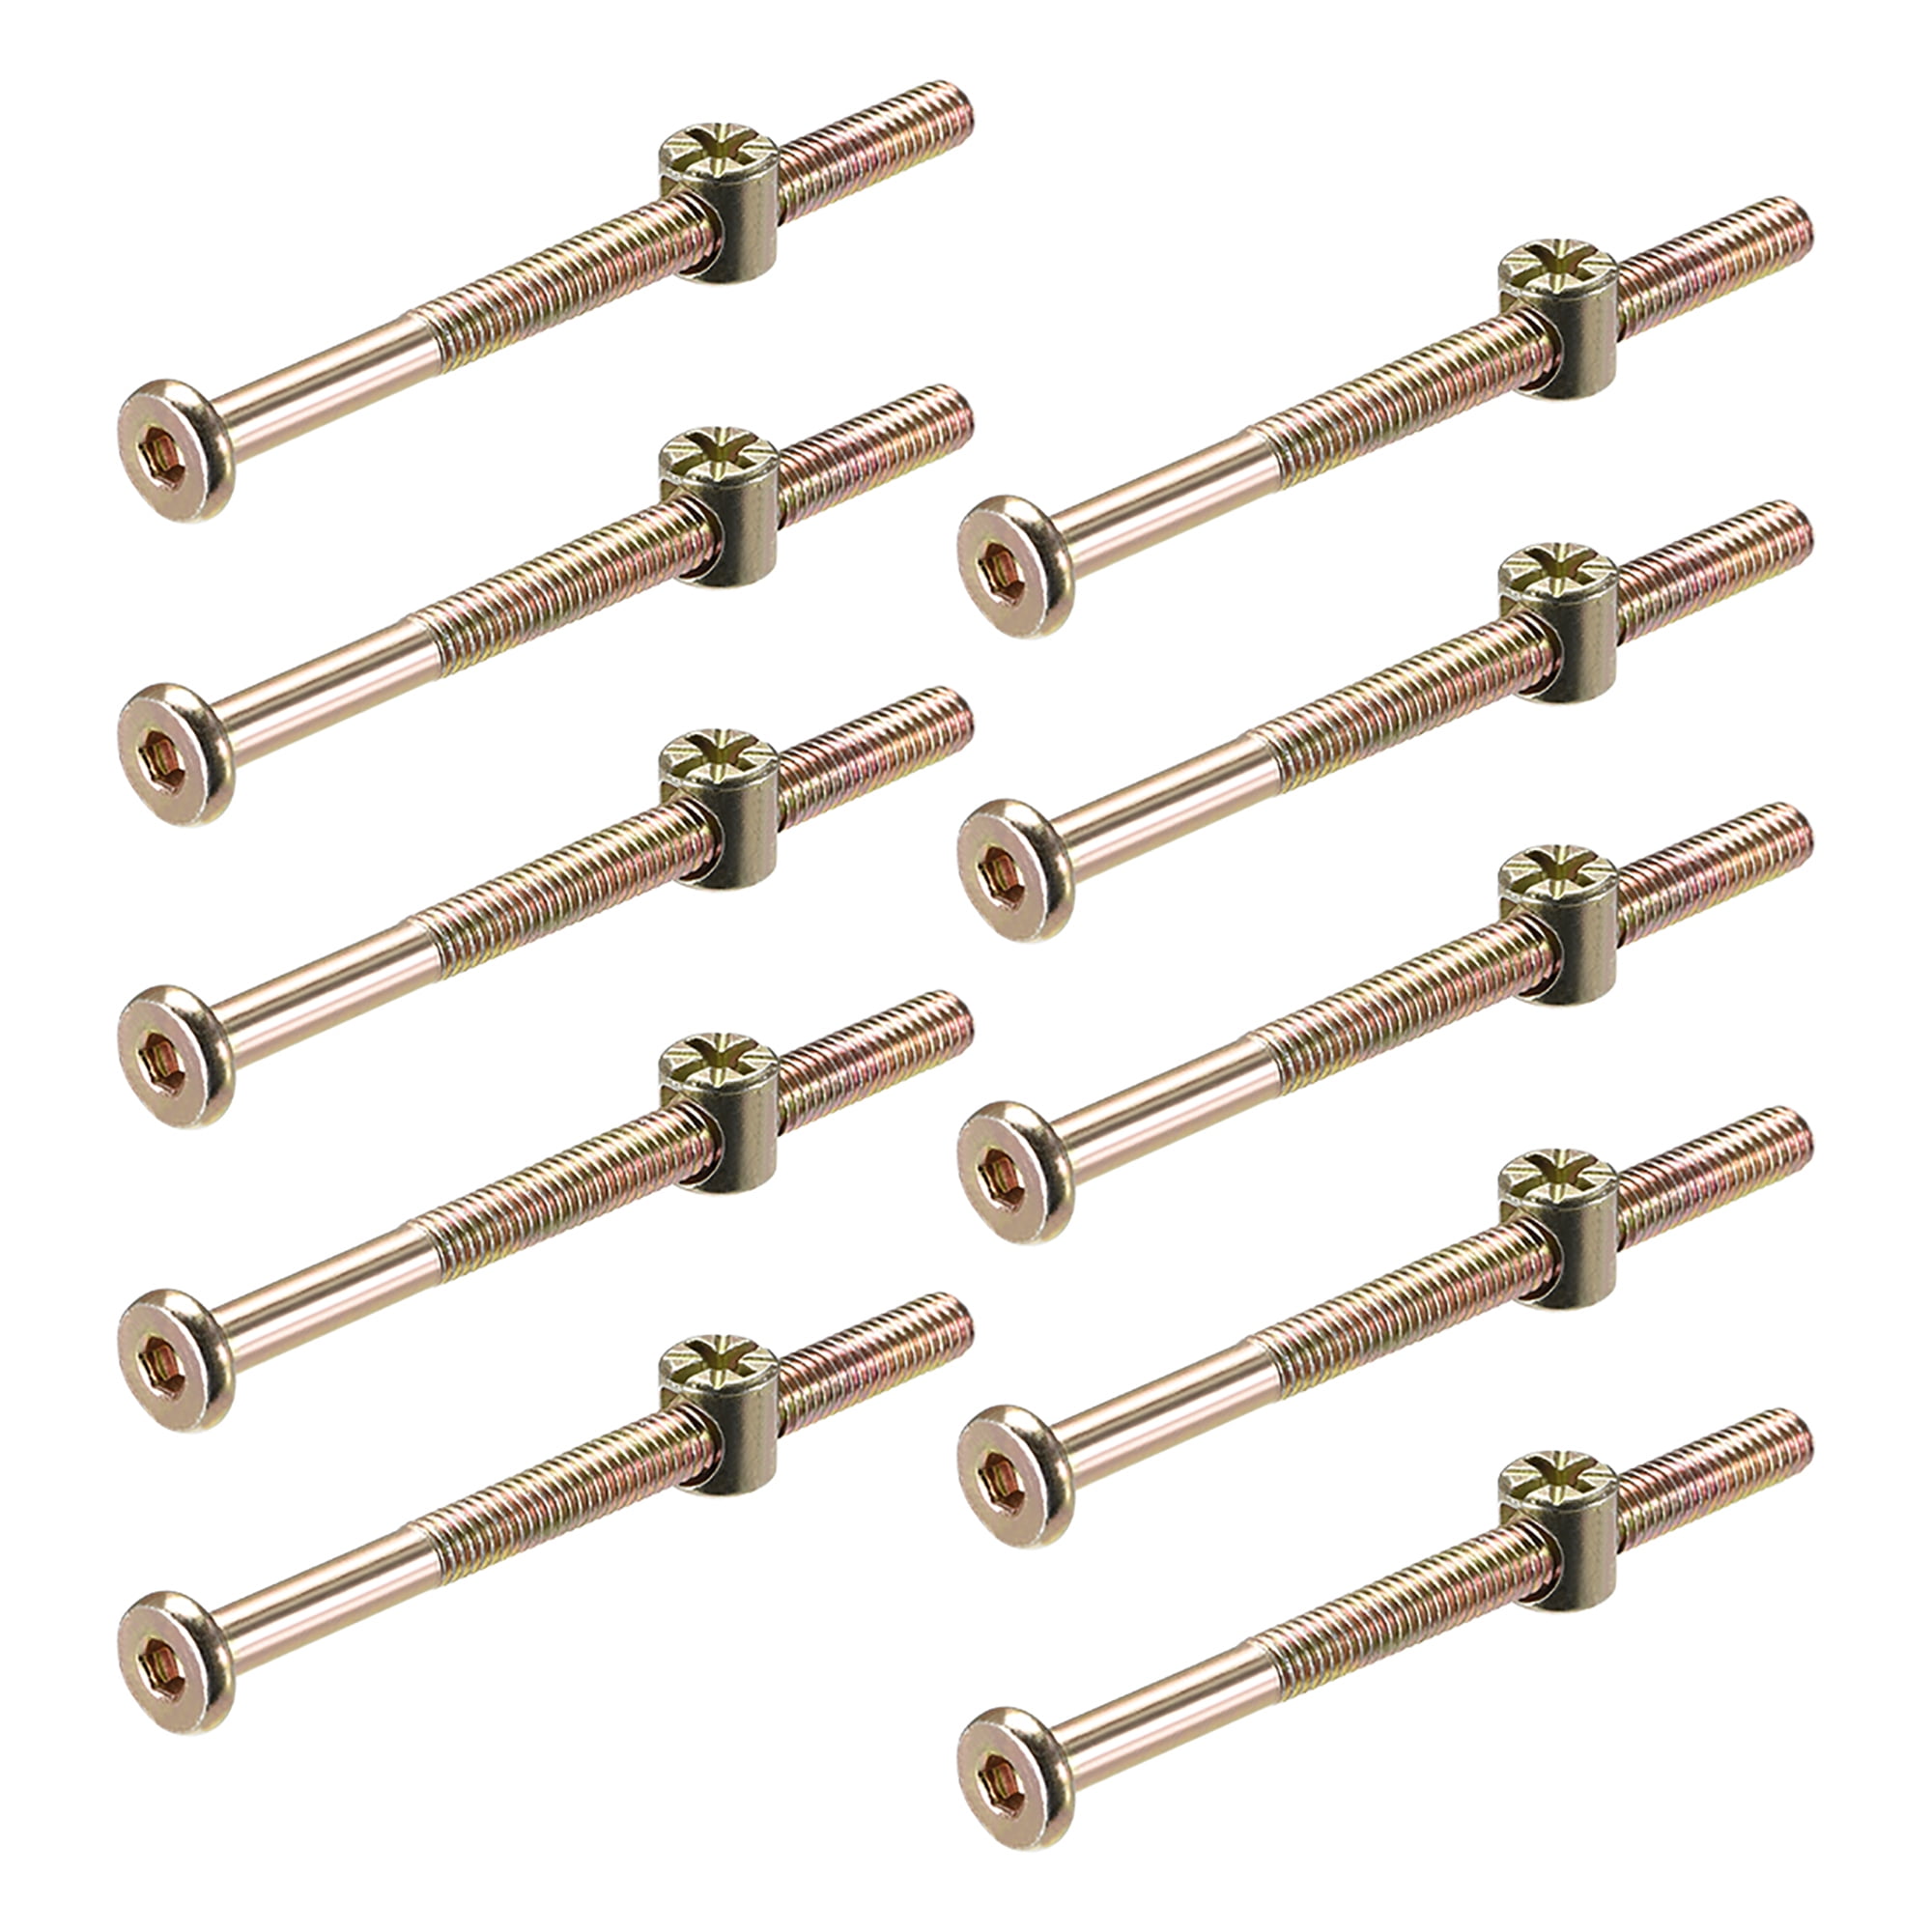 M6 x 70mm bed connector bolts with half moon nut baby furniture 